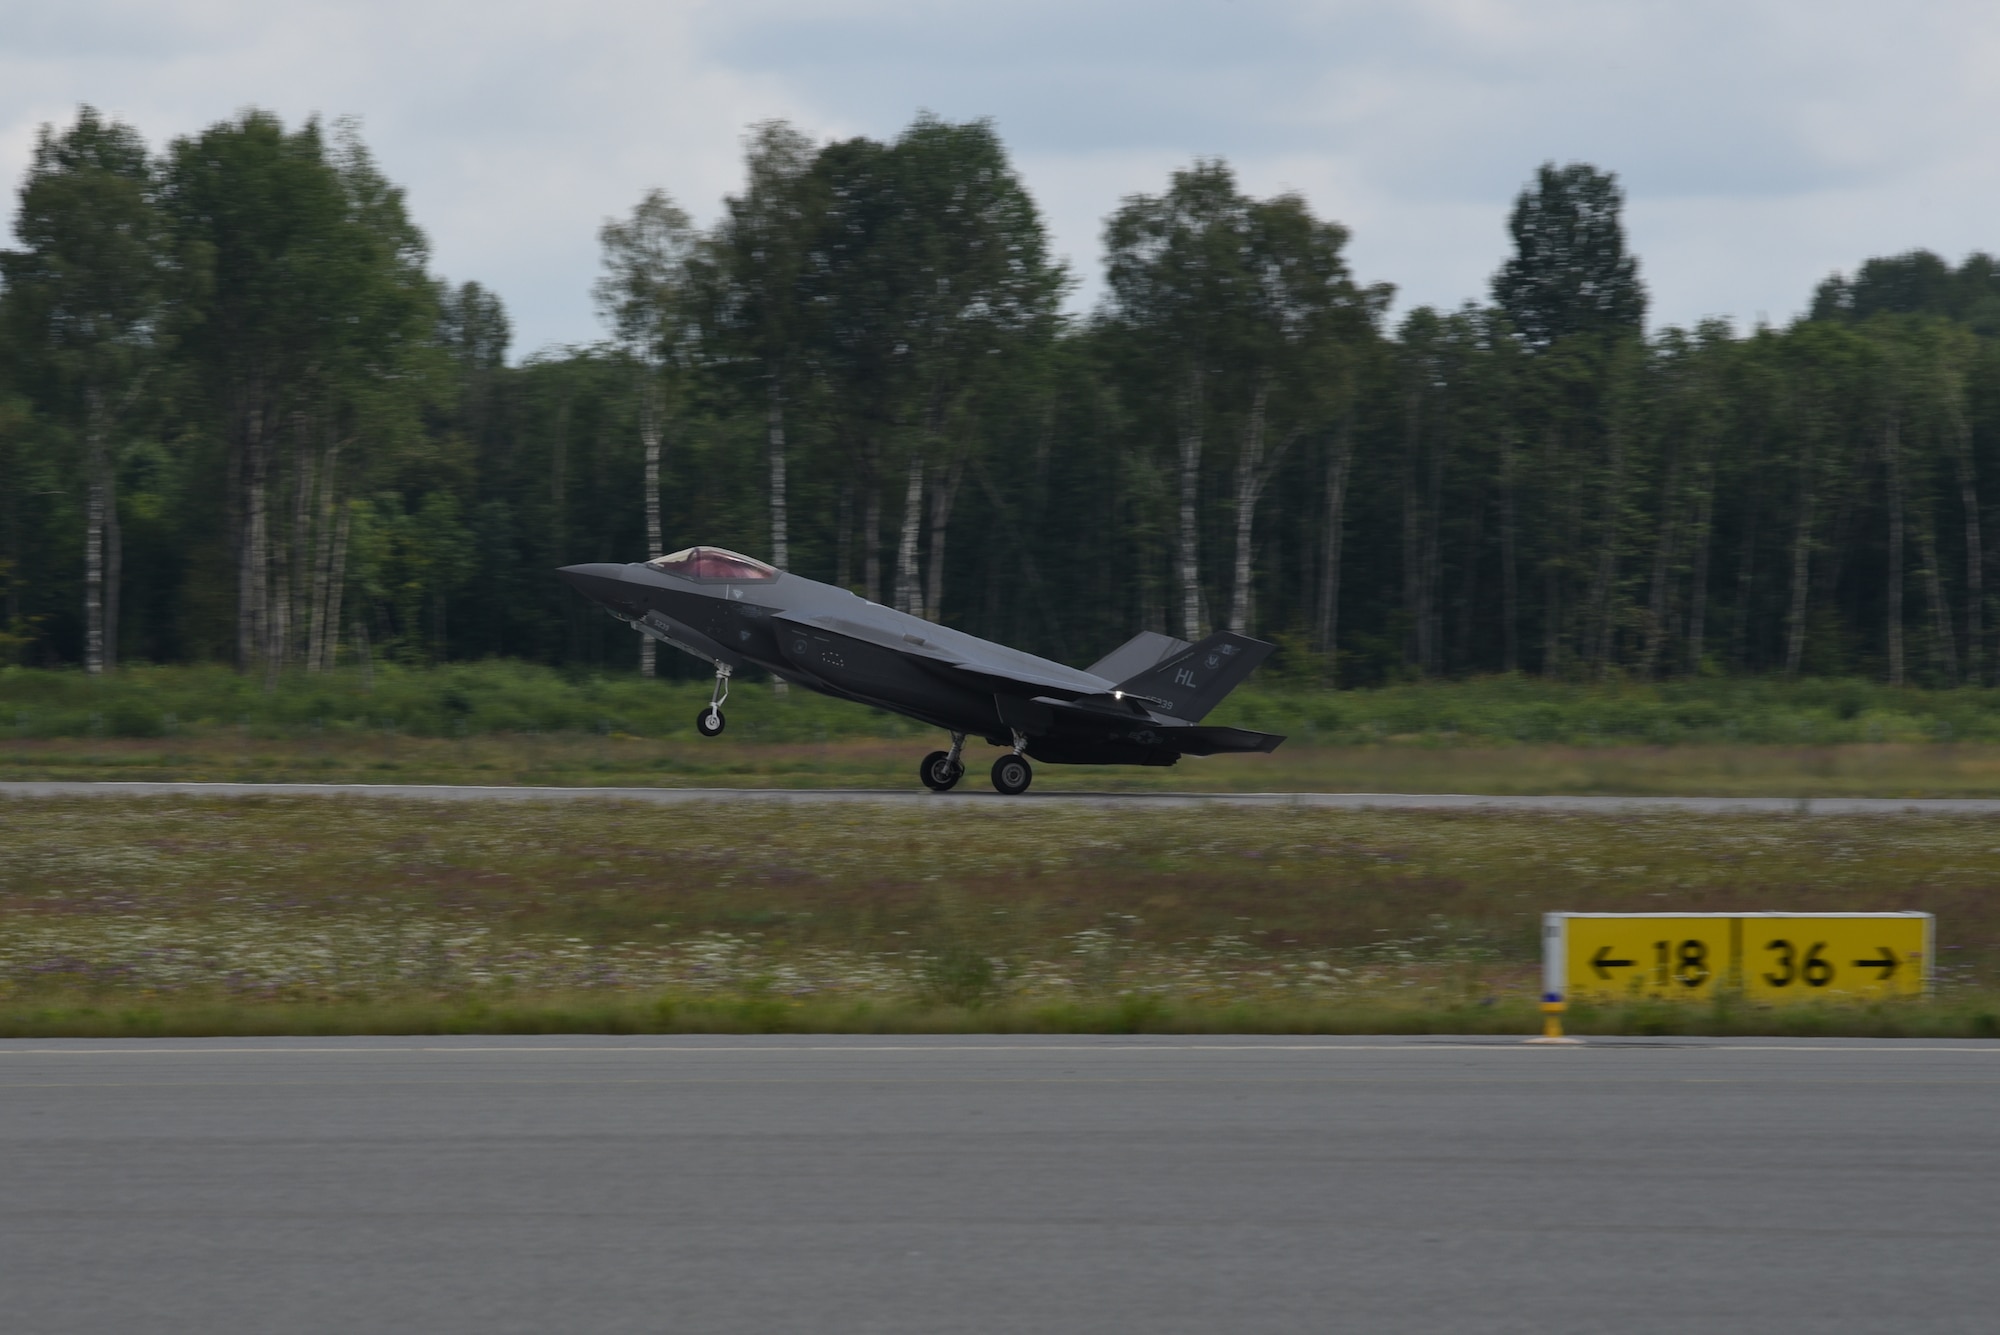 A U.S. Air Force F-35A Lightning II fighter jet deployed from the 388th and 419th Fighter Wings, Hill Air Force Base, Utah, lands on a runway during Operation Rapid Forge at Lielvarde Air Base, Latvia, July, 23, 2019. This is the first time a U.S. Air Force F-35 Lightning II stealth fighter has landed in Latvia. Operation Rapid Forge is intended to enhance interoperability with NATO allies to improve combined operational capabilities.